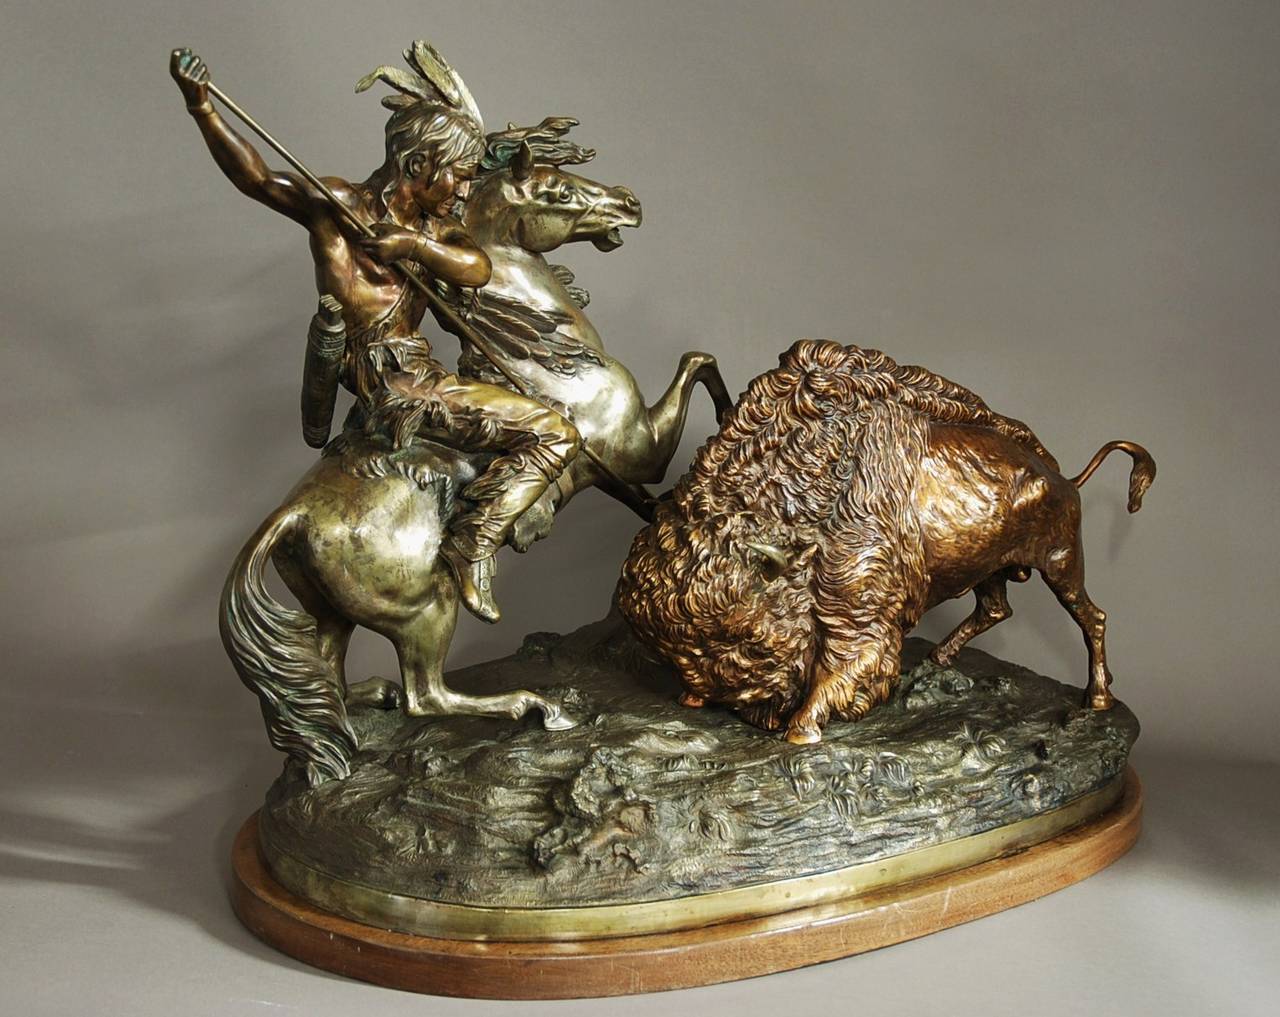 A large, fine quality bronze figure of 'The Buffalo Hunt' by Theodore Baur (1835-1894).

This bronze is a re-strike of superb quality from the original figure which was produced between 1876-1886 and depicts a native American on horseback holding